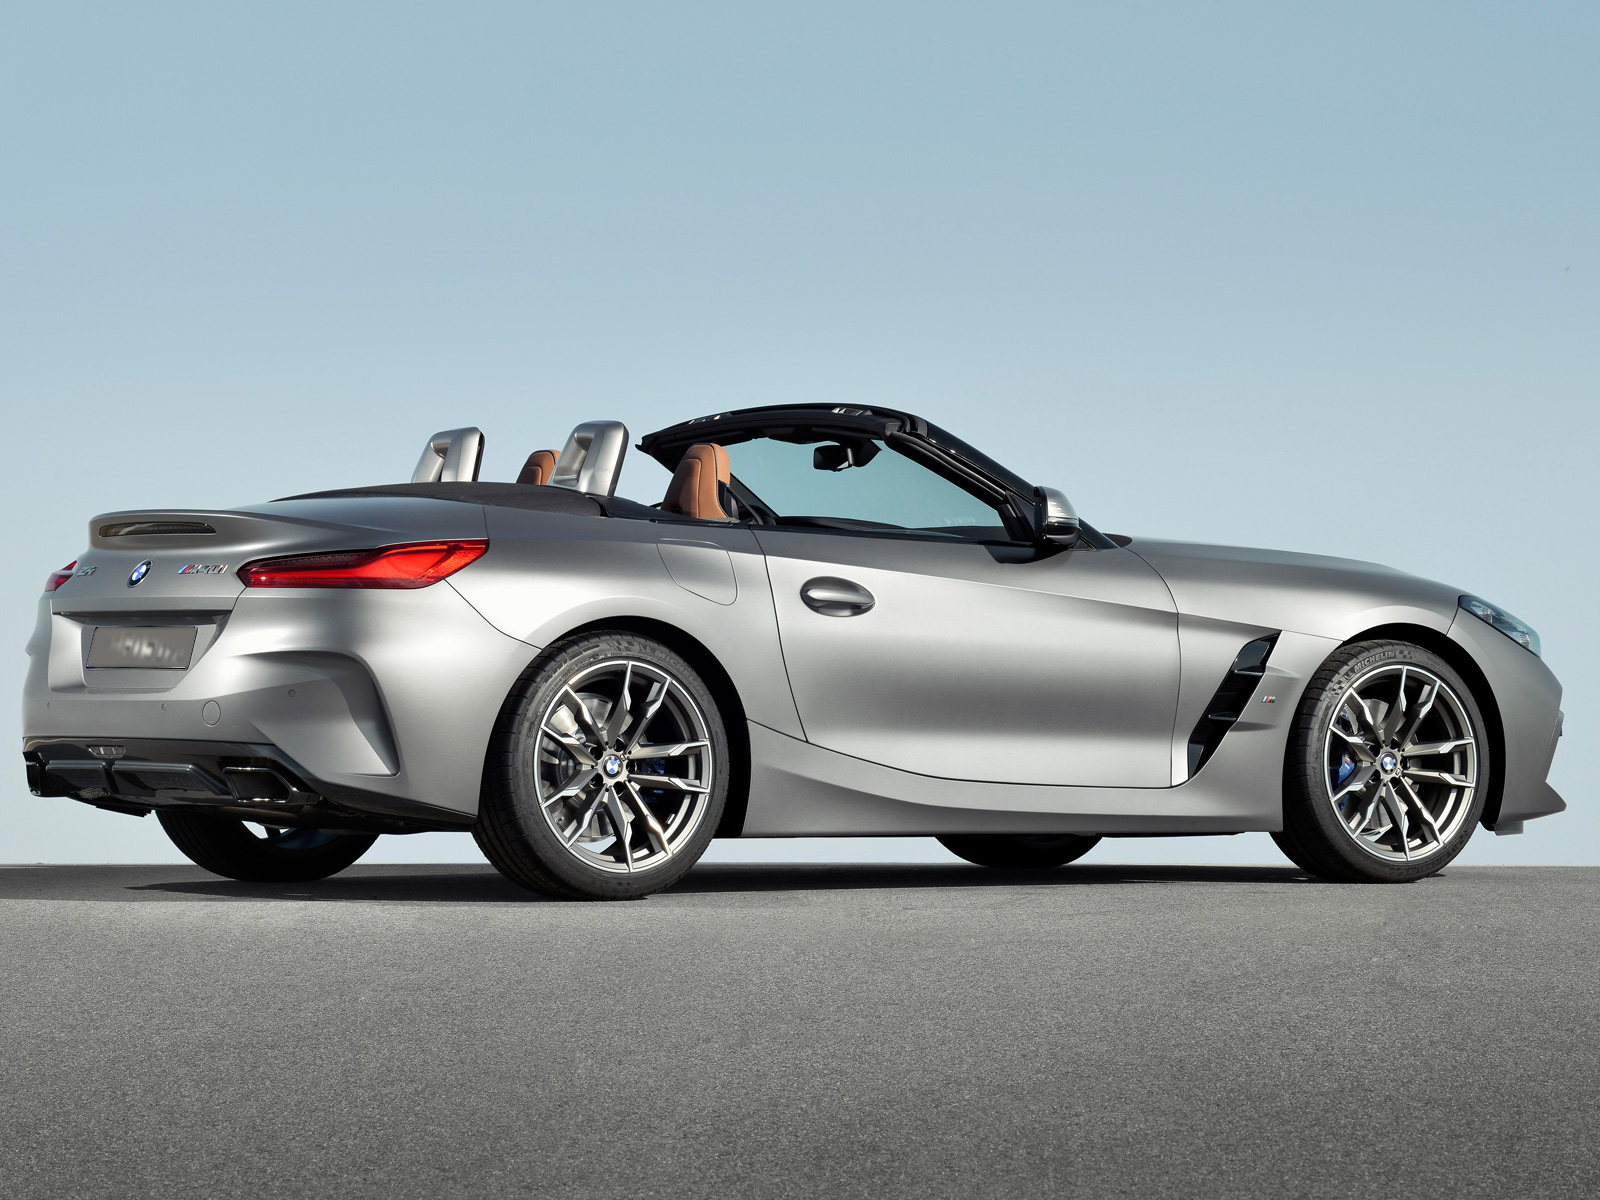 The All-New 2019 BMW Z4 Roadster - The 19th Hole Magazine